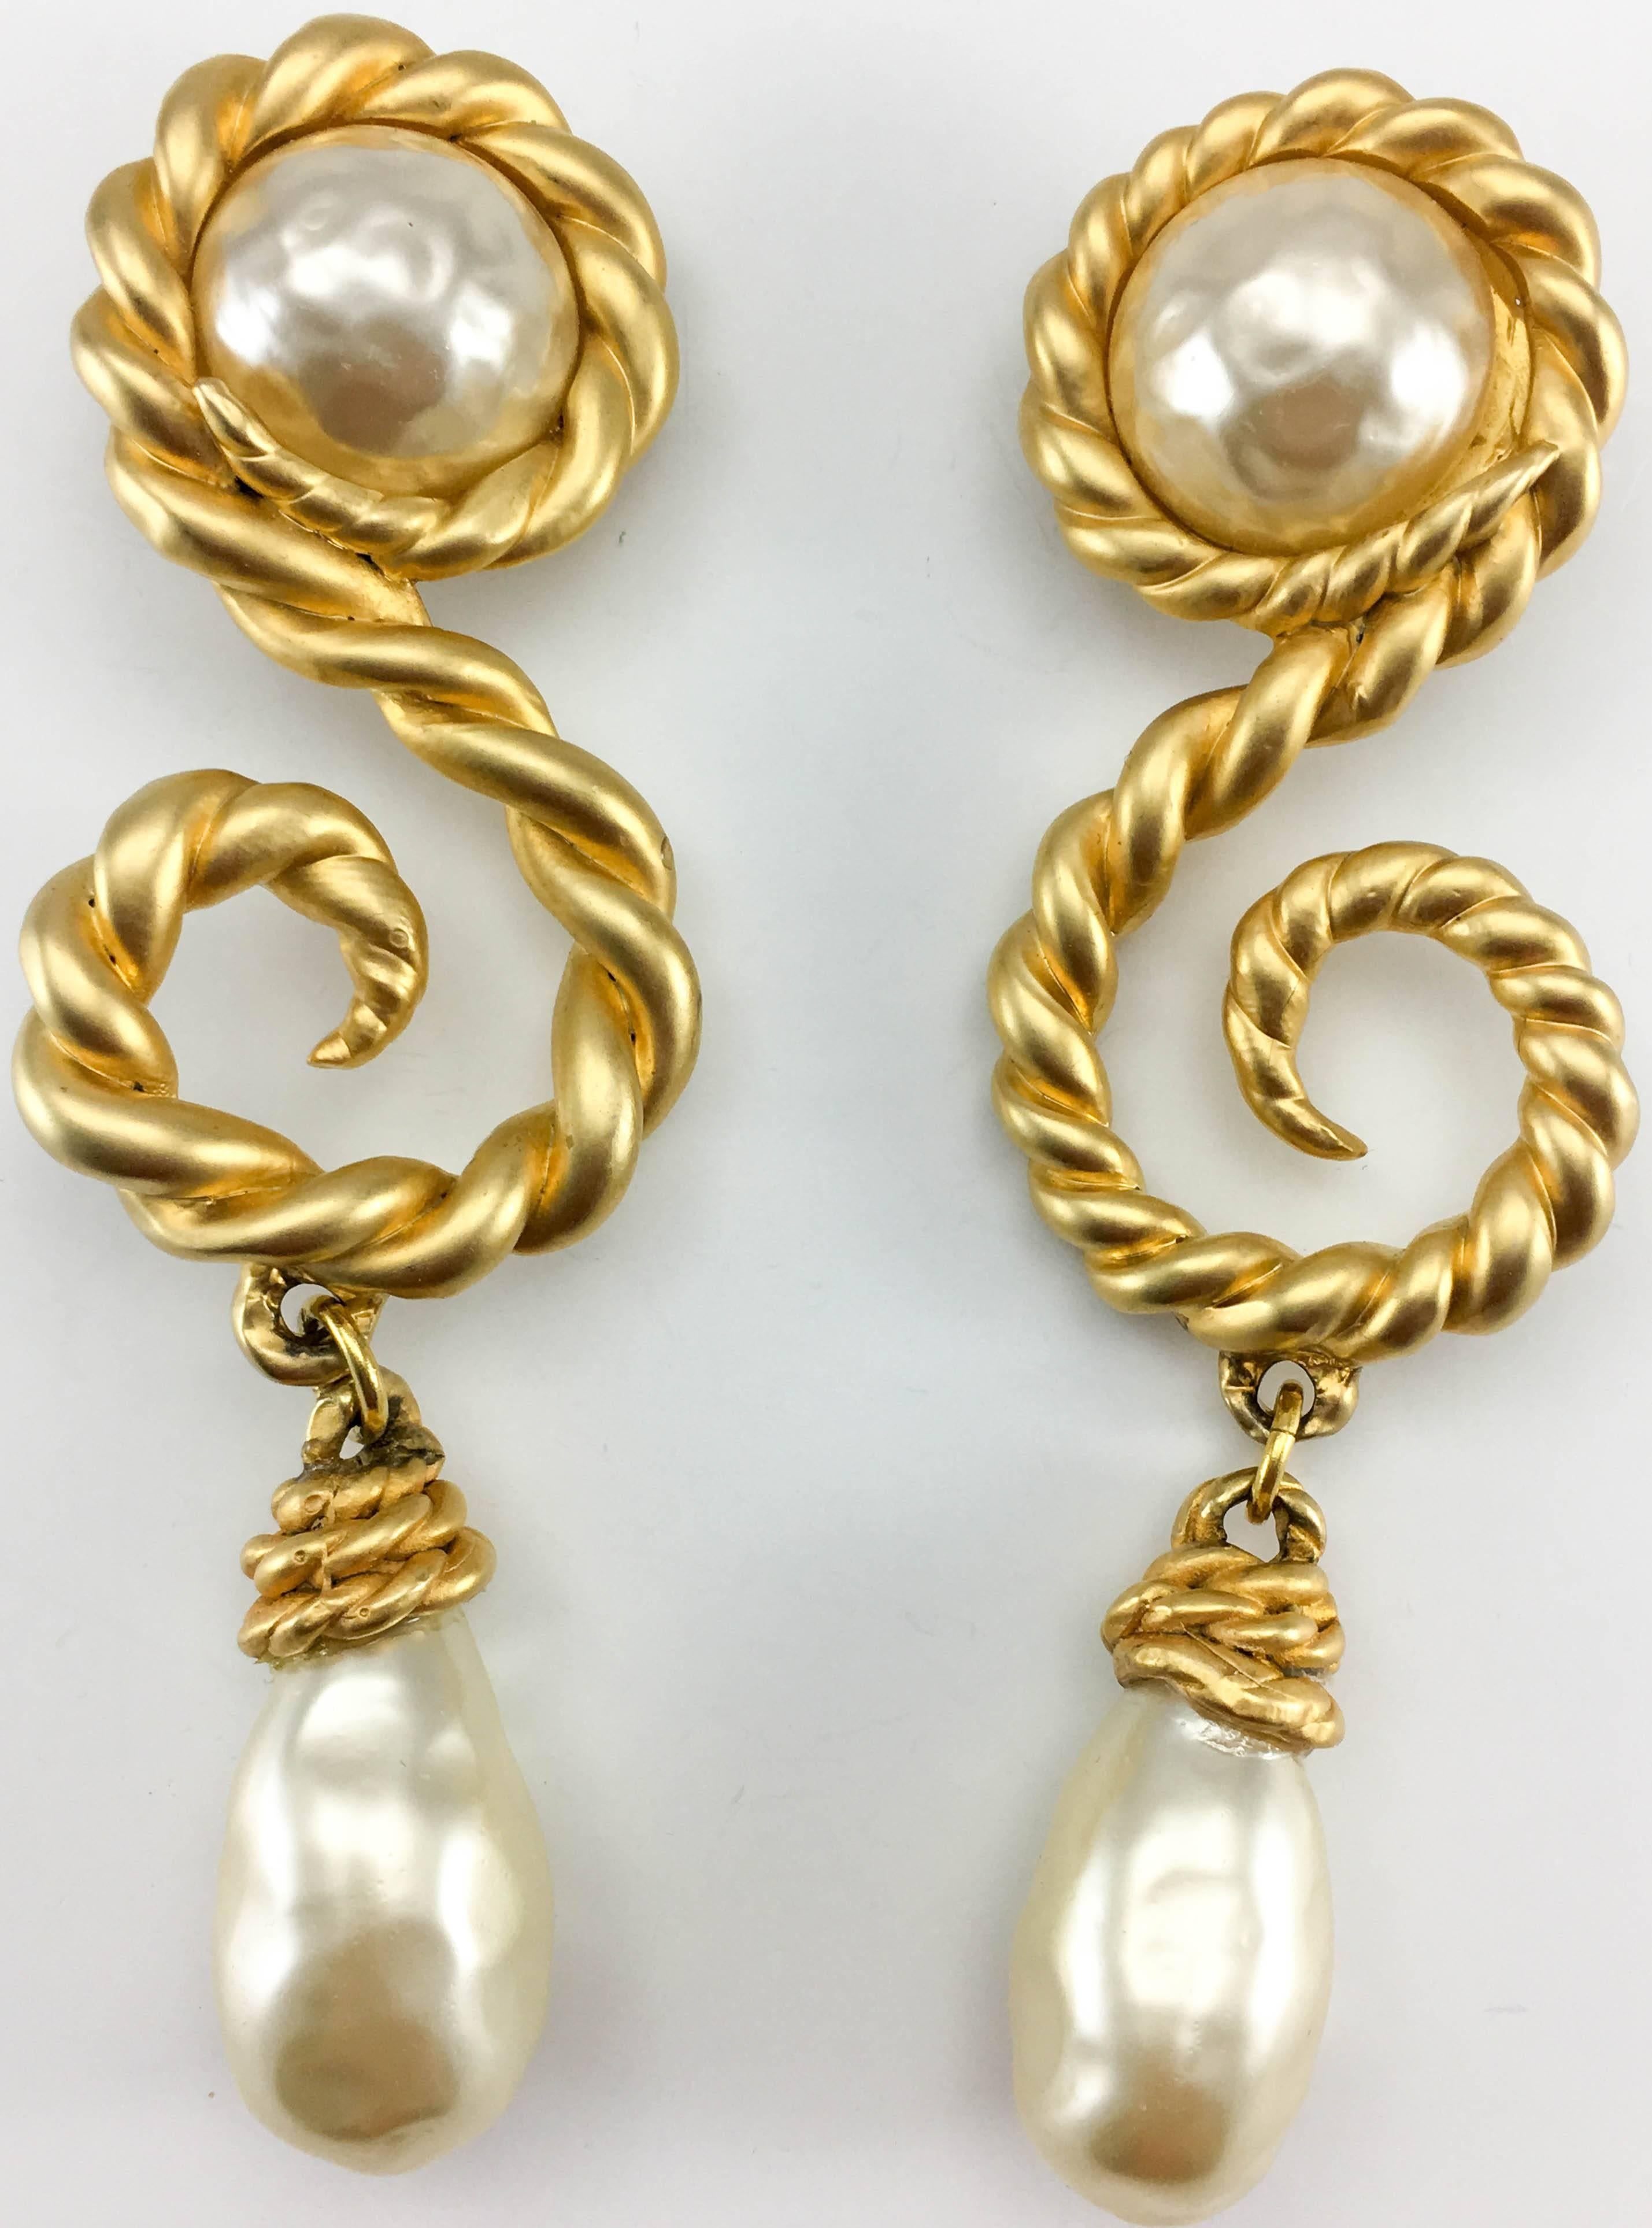 Chanel 1990 Runway Look Massive Arabesque and Baroque Pearl Earrings 2